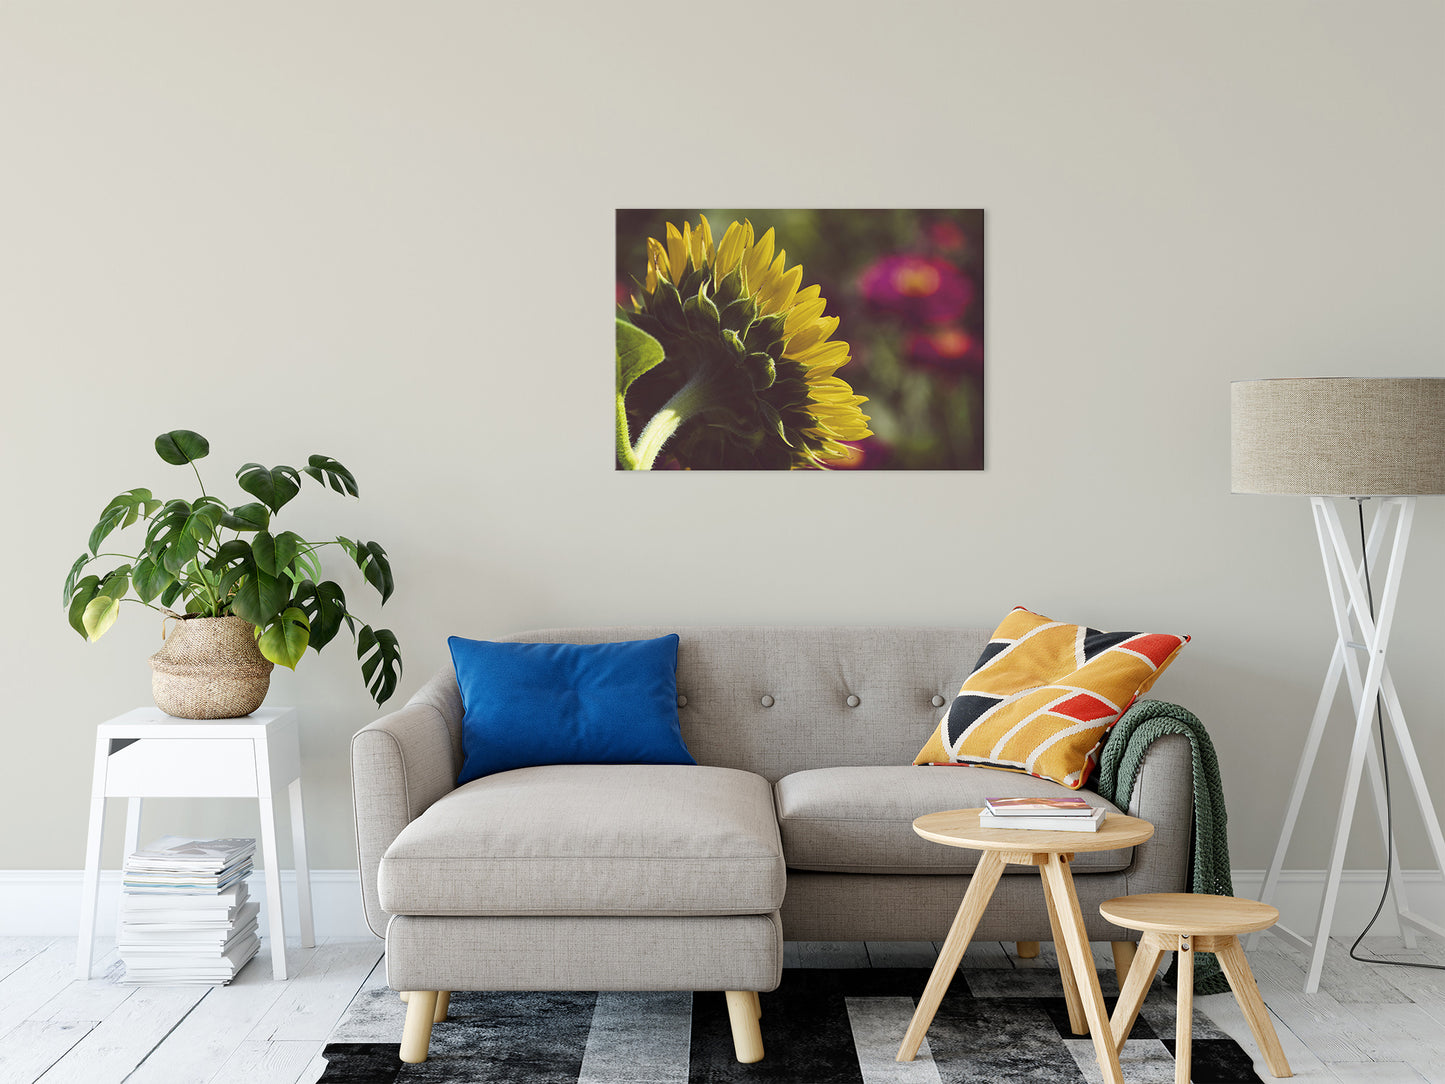 Dramatic Backside of Sunflower Grain Nature / Floral Photo Fine Art Canvas Wall Art Prints 24" x 36" - PIPAFINEART